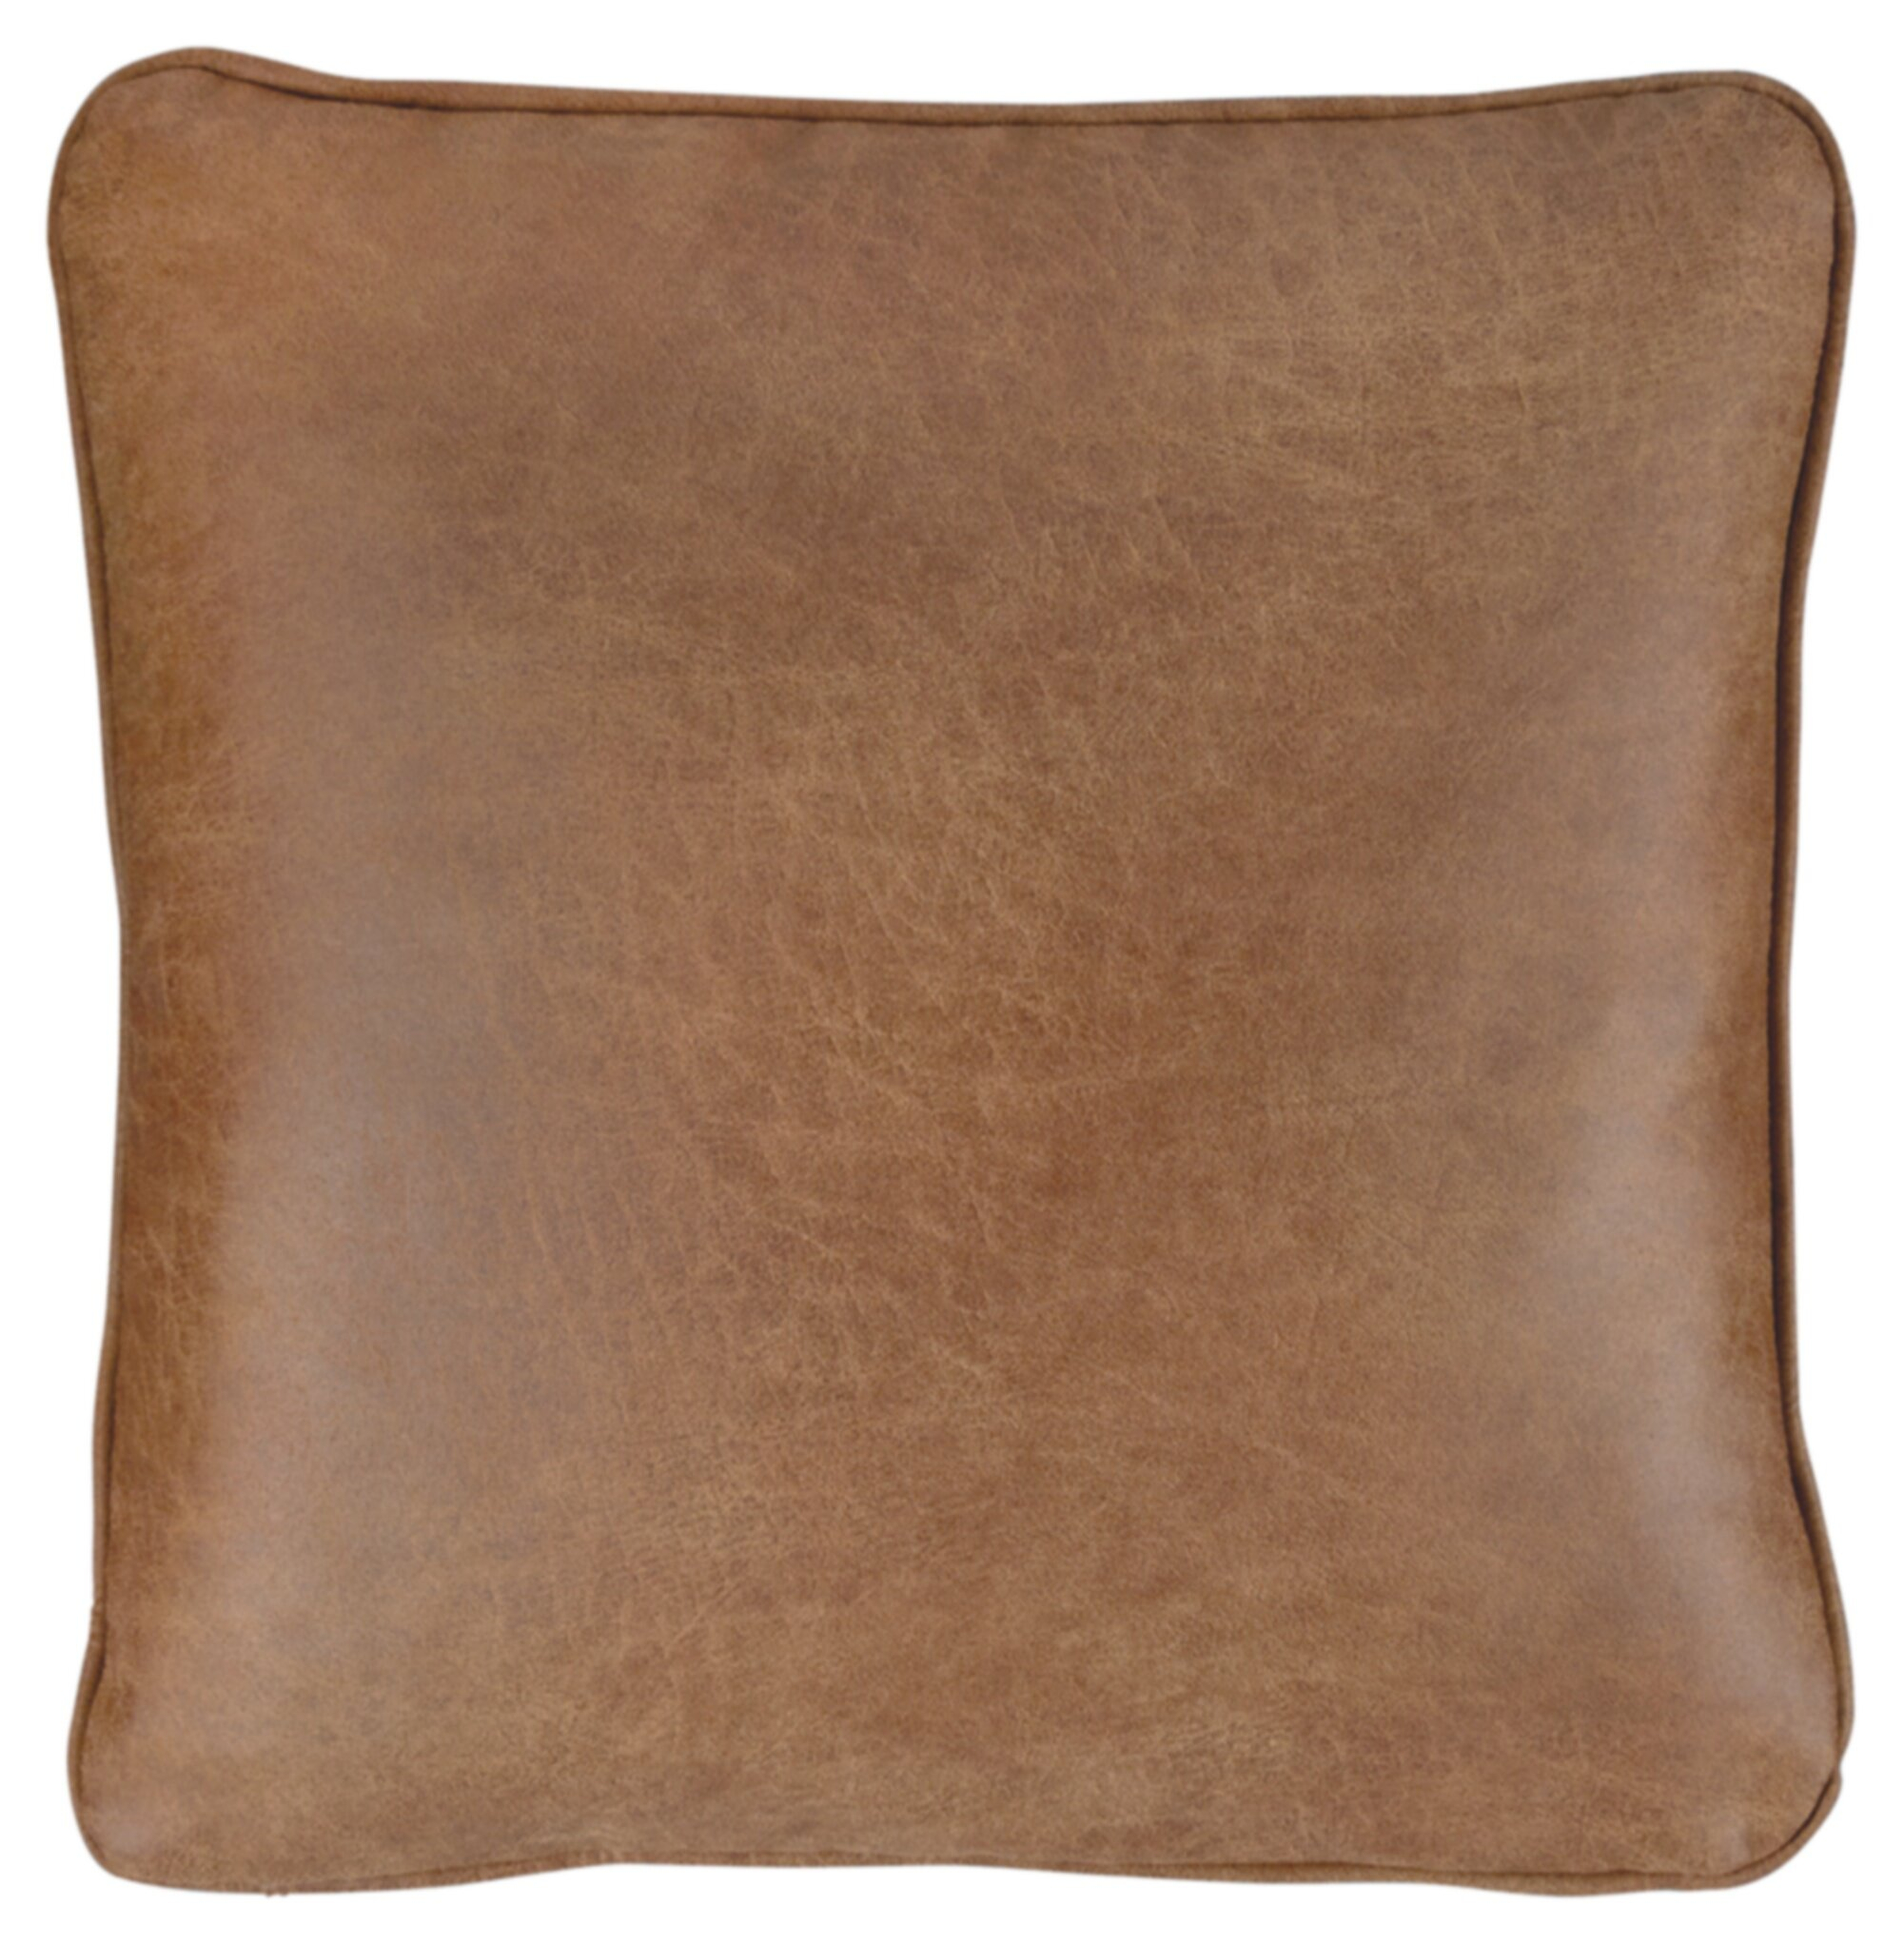 Desoto Square Faux Leather Pillow Cover and Insert RESTOCK IN APR 7,2021. - Wayfair